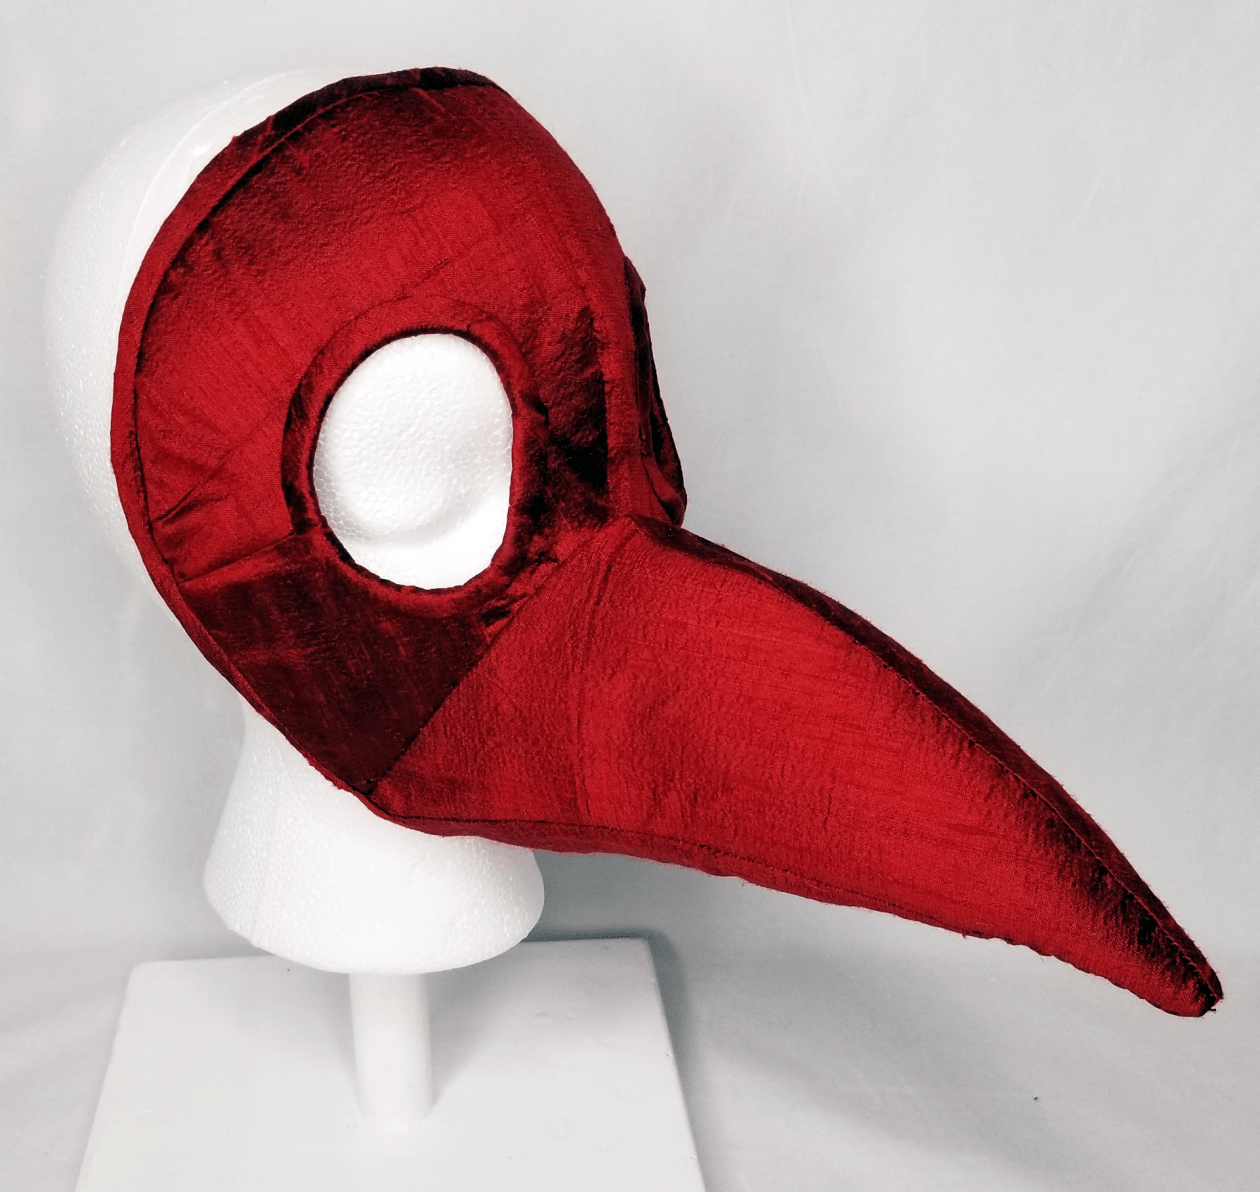 A red beaked mask on a head form